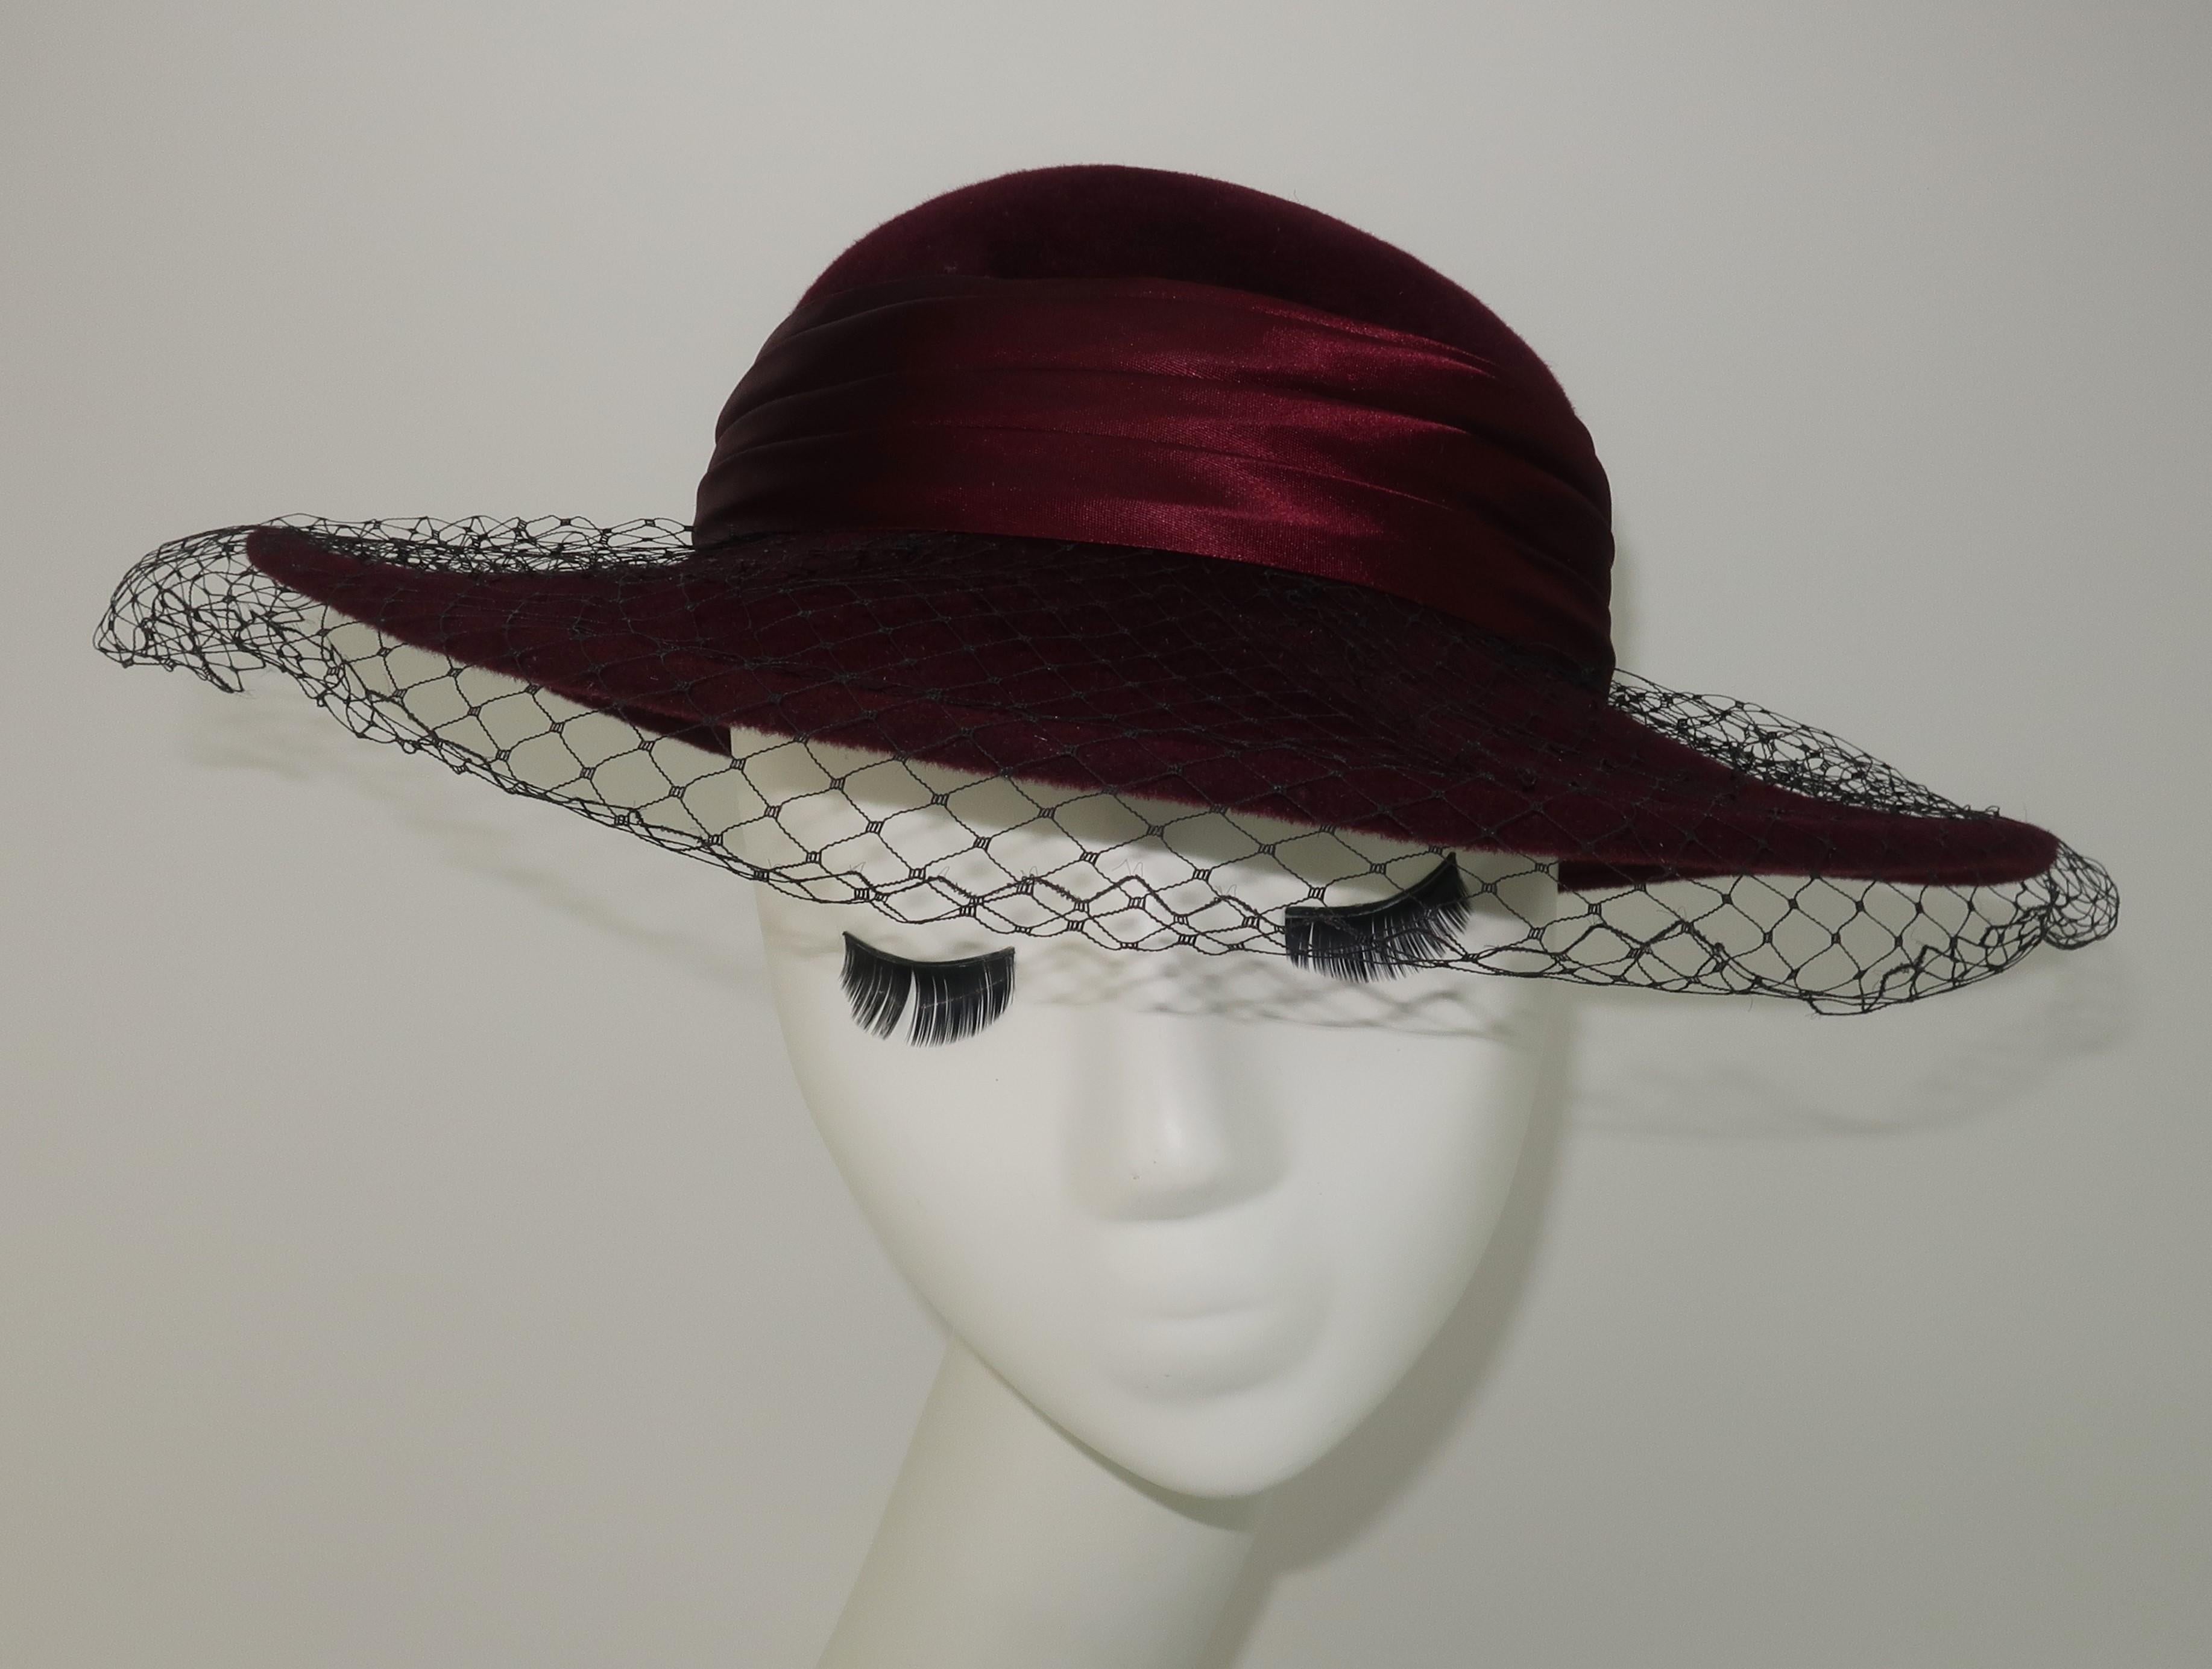 1980's Saks Fifth Avenue aubergine wool felt hat with a wide brim, coordinating satin band and demure black net.  A perfect touch of class!
CONDITION
Good vintage condition with some wear and signs of storage.  There is a subtle small spot to the